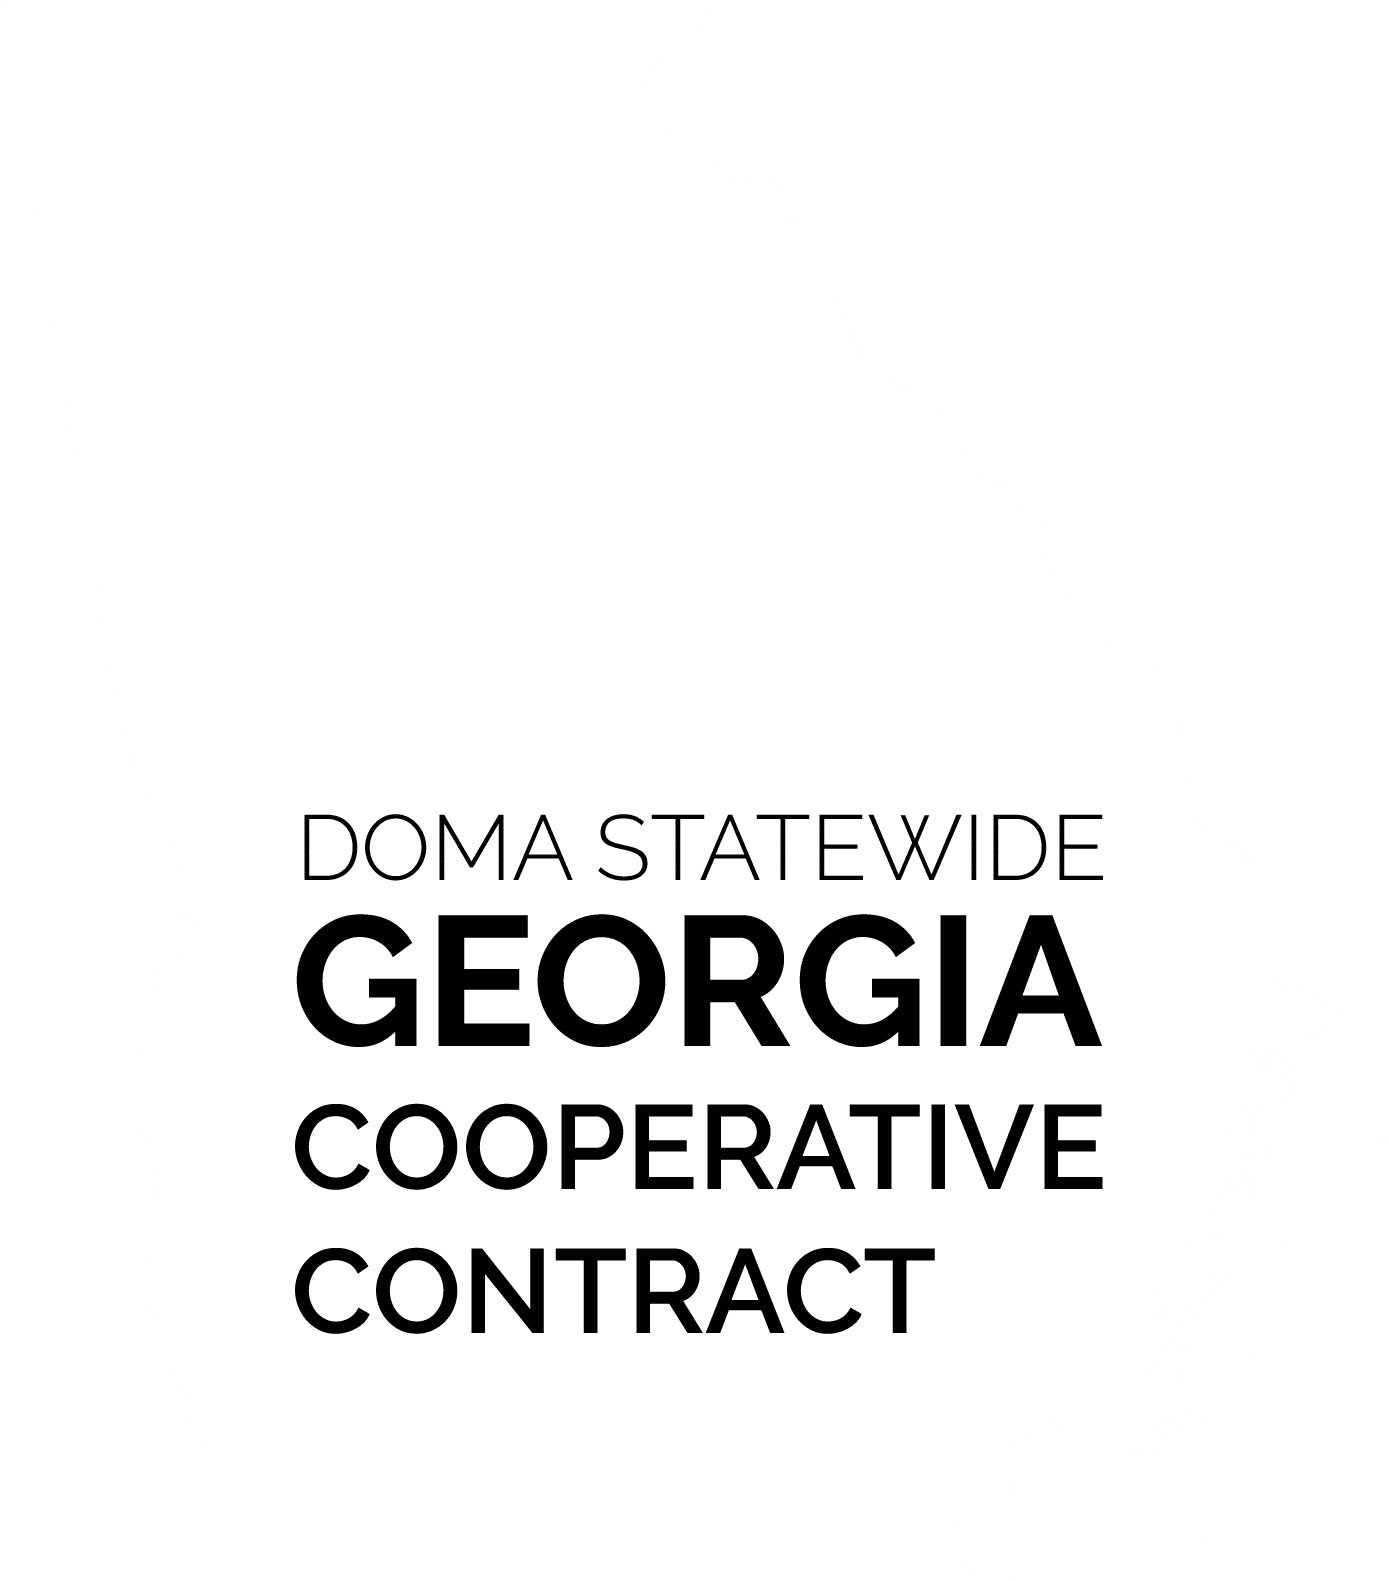 DOMA Statewide Georgia Cooperative Contract